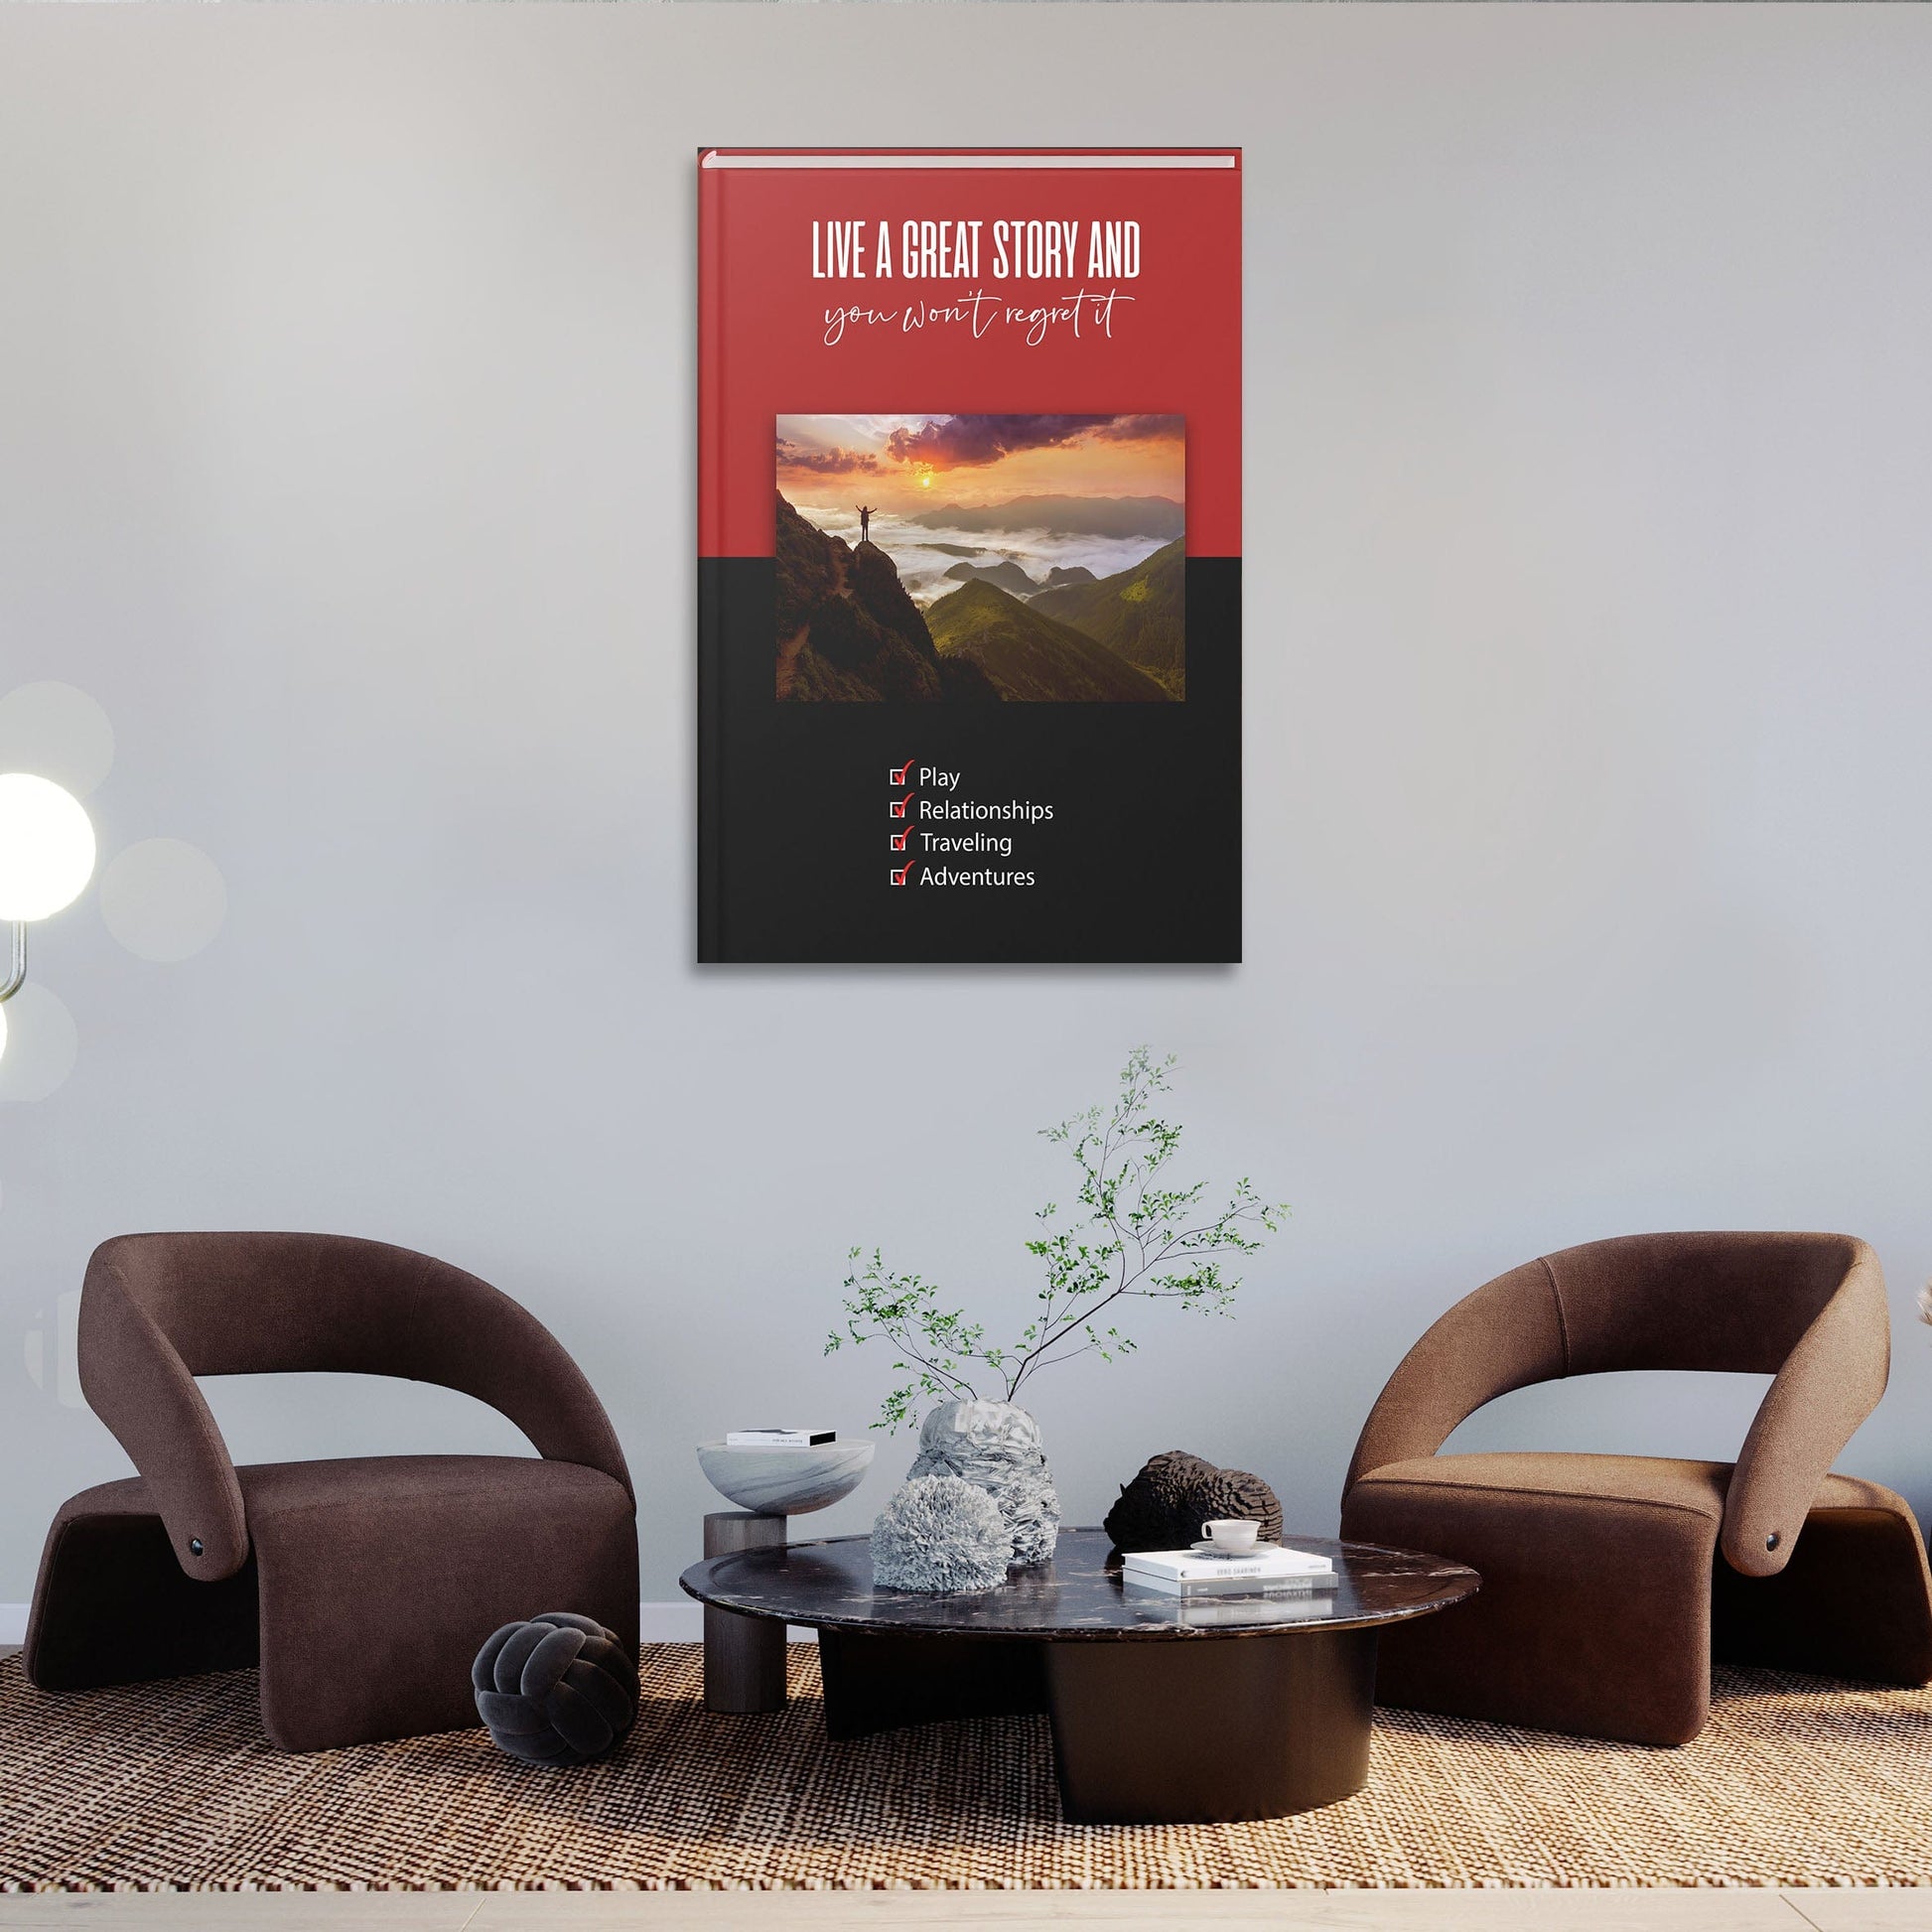 Live a Great Story Wall Art | Inspirational Wall Art Motivational Wall Art Quotes Office Art | ImpaktMaker Exclusive Canvas Art Portrait